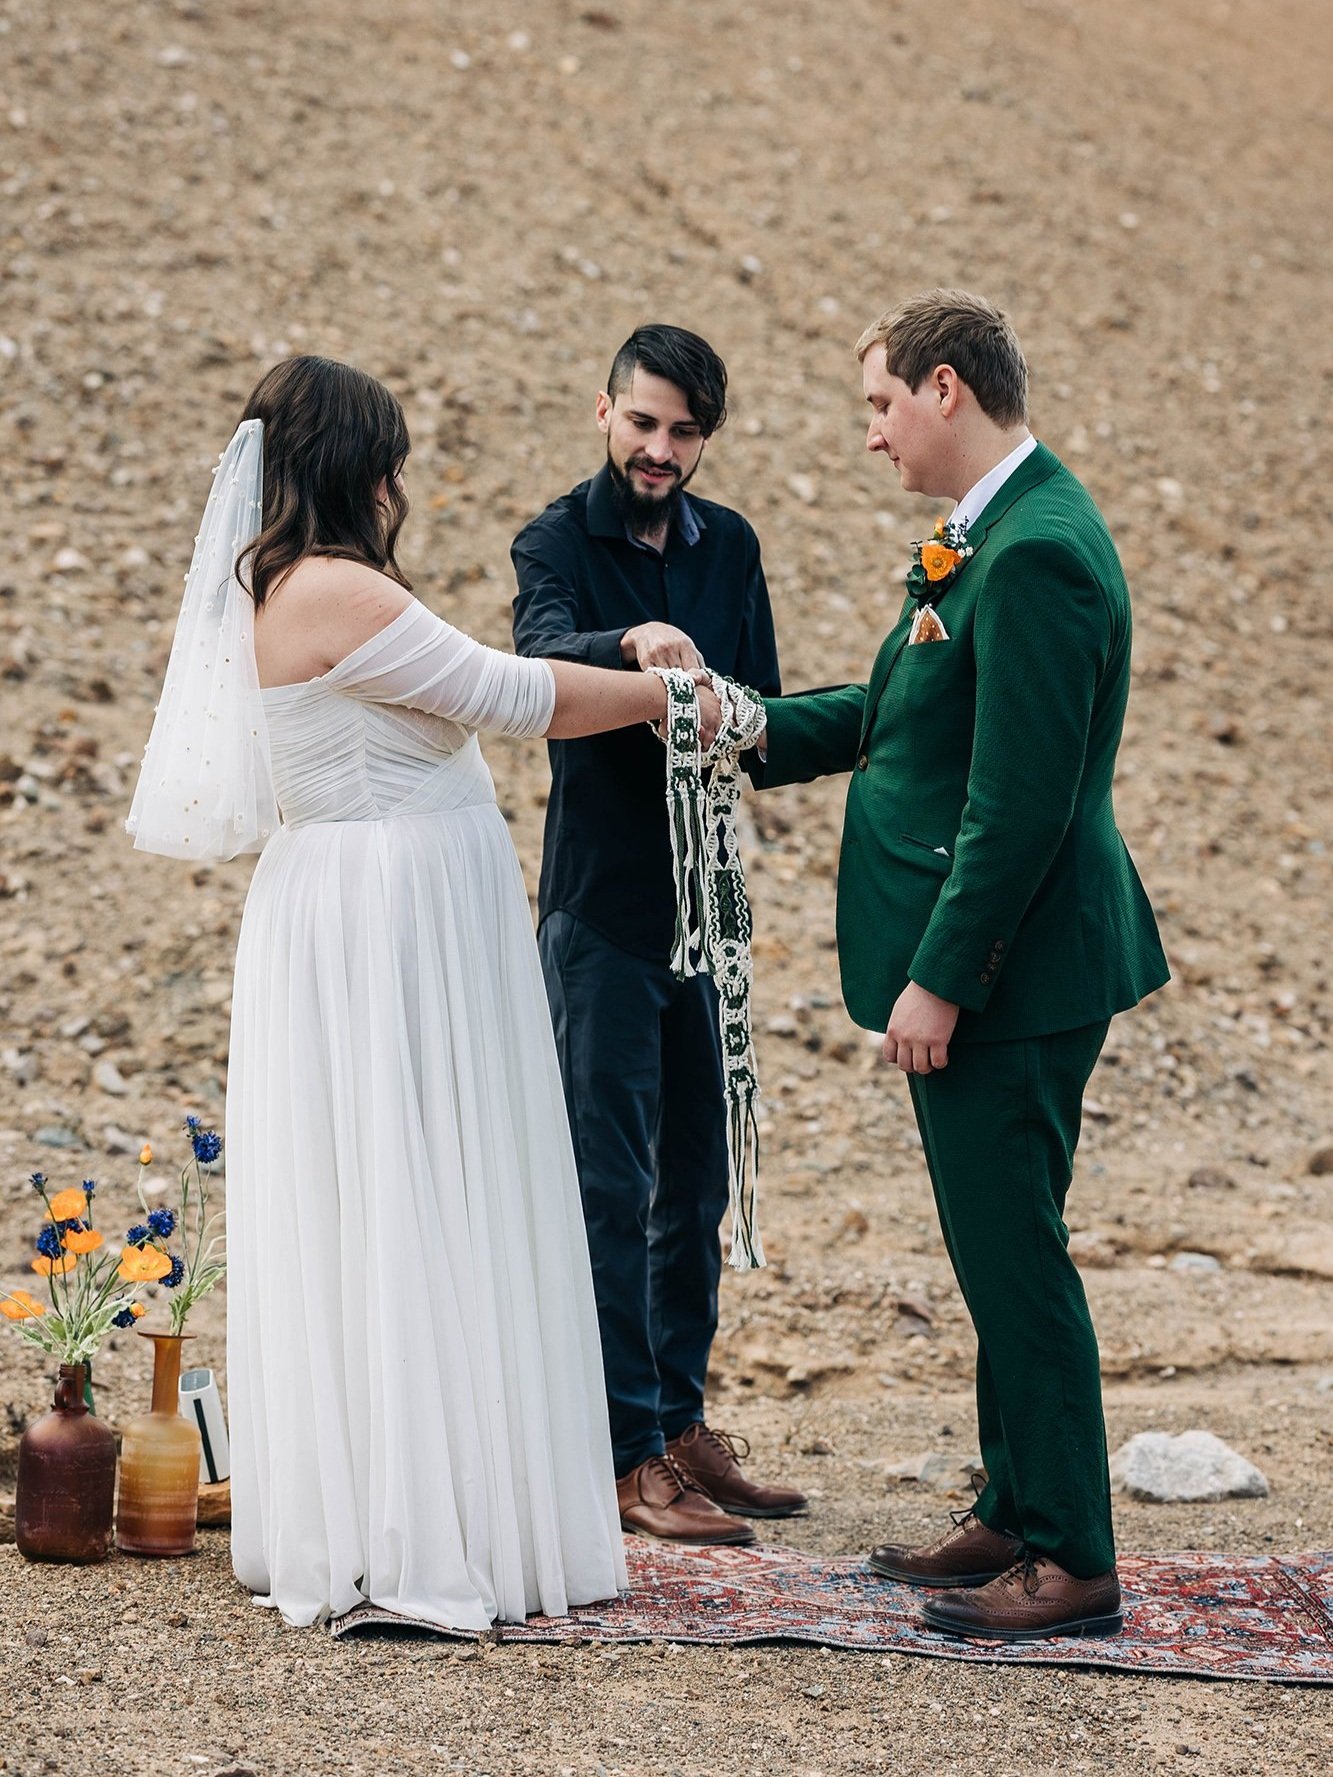 Everything to Know About the Handfasting Ceremony